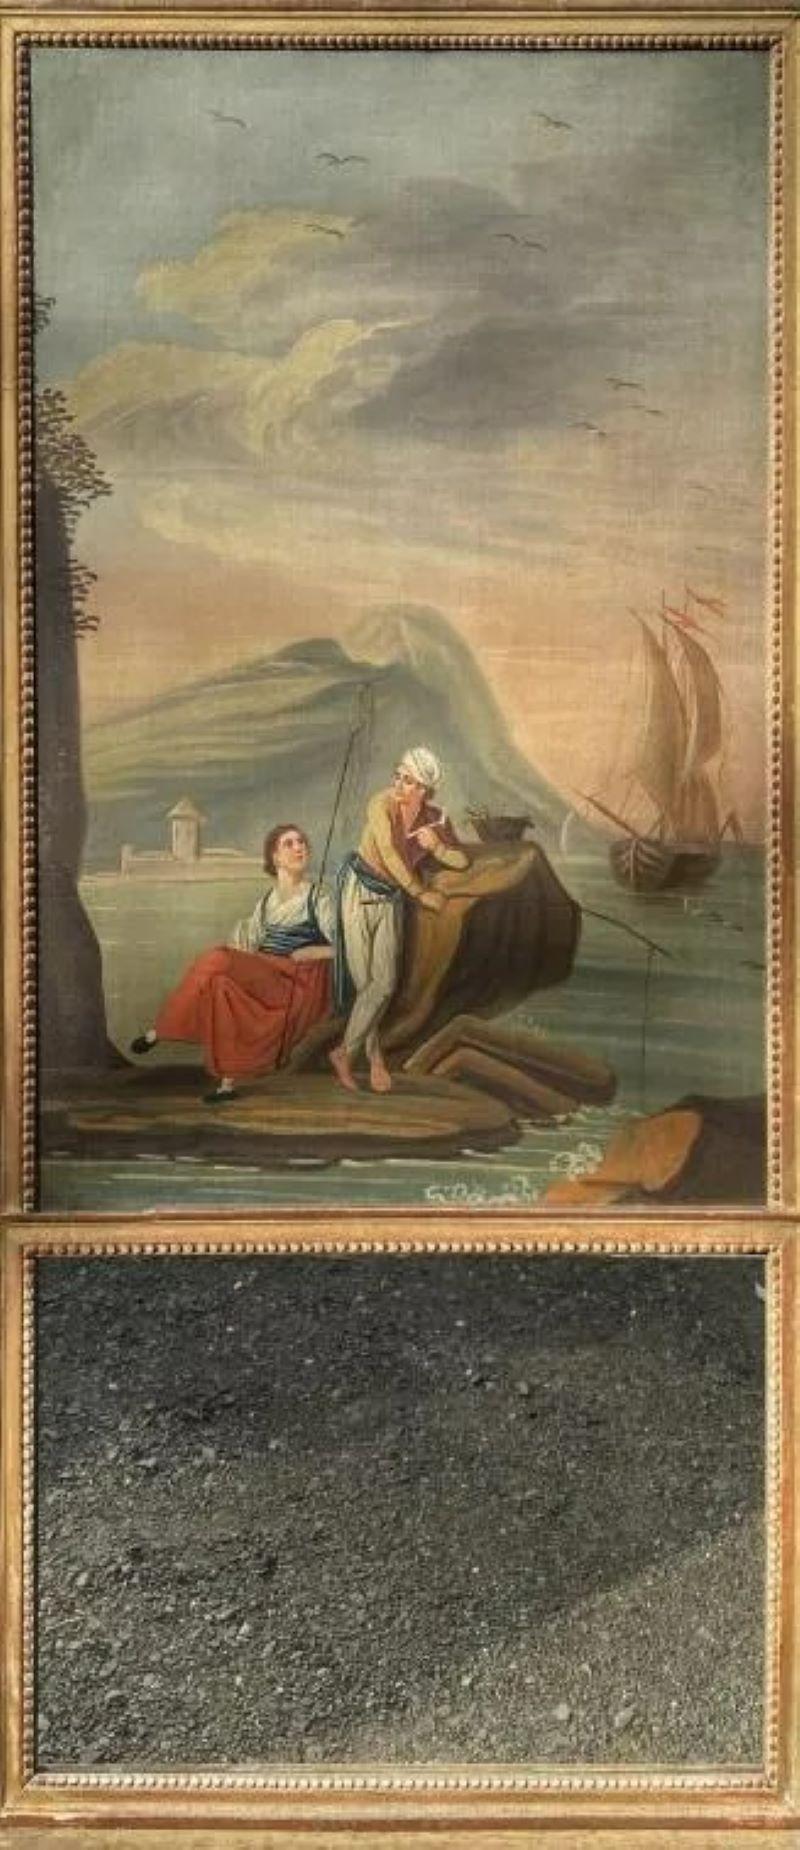 A Louis XVI period trumeau mirror with painted scene of a sailor and woman in a port with ships in the background, circa 1790.